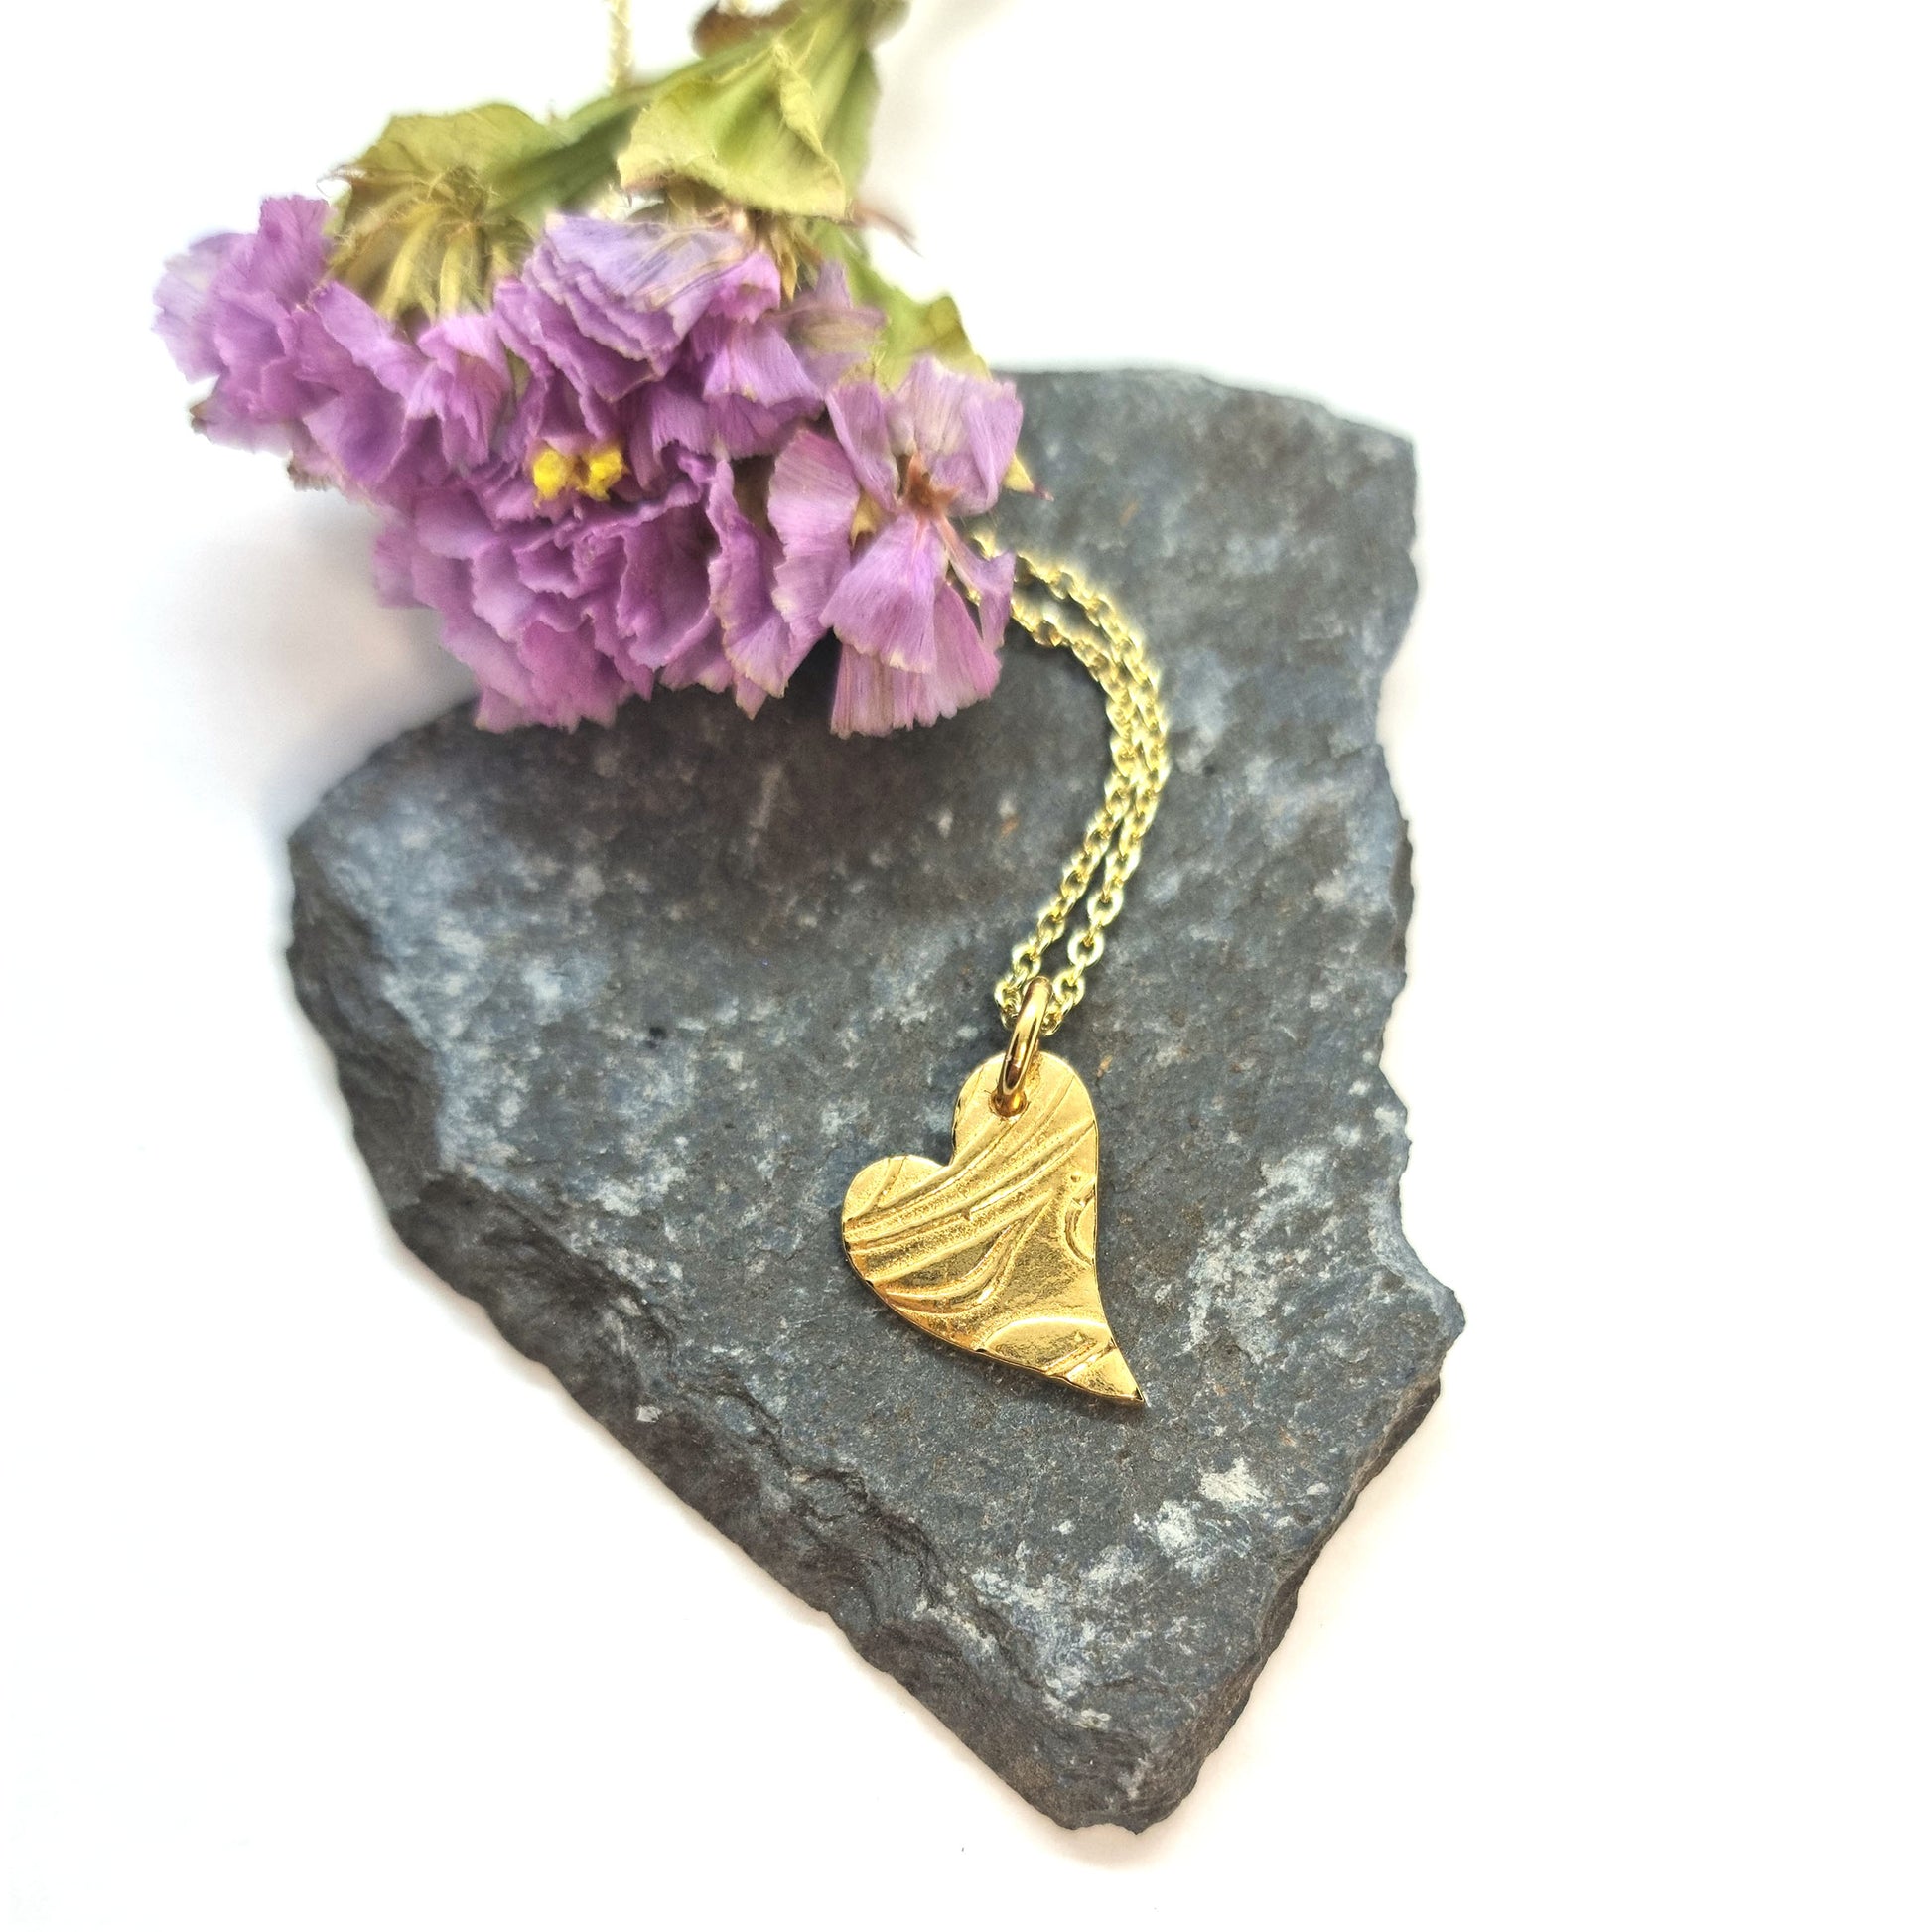 Yellow gold vermeil asymmetrical heart pendant with a leaf & vine design on a yellow gold vermeil chain. Pictured on a stone with flowers.